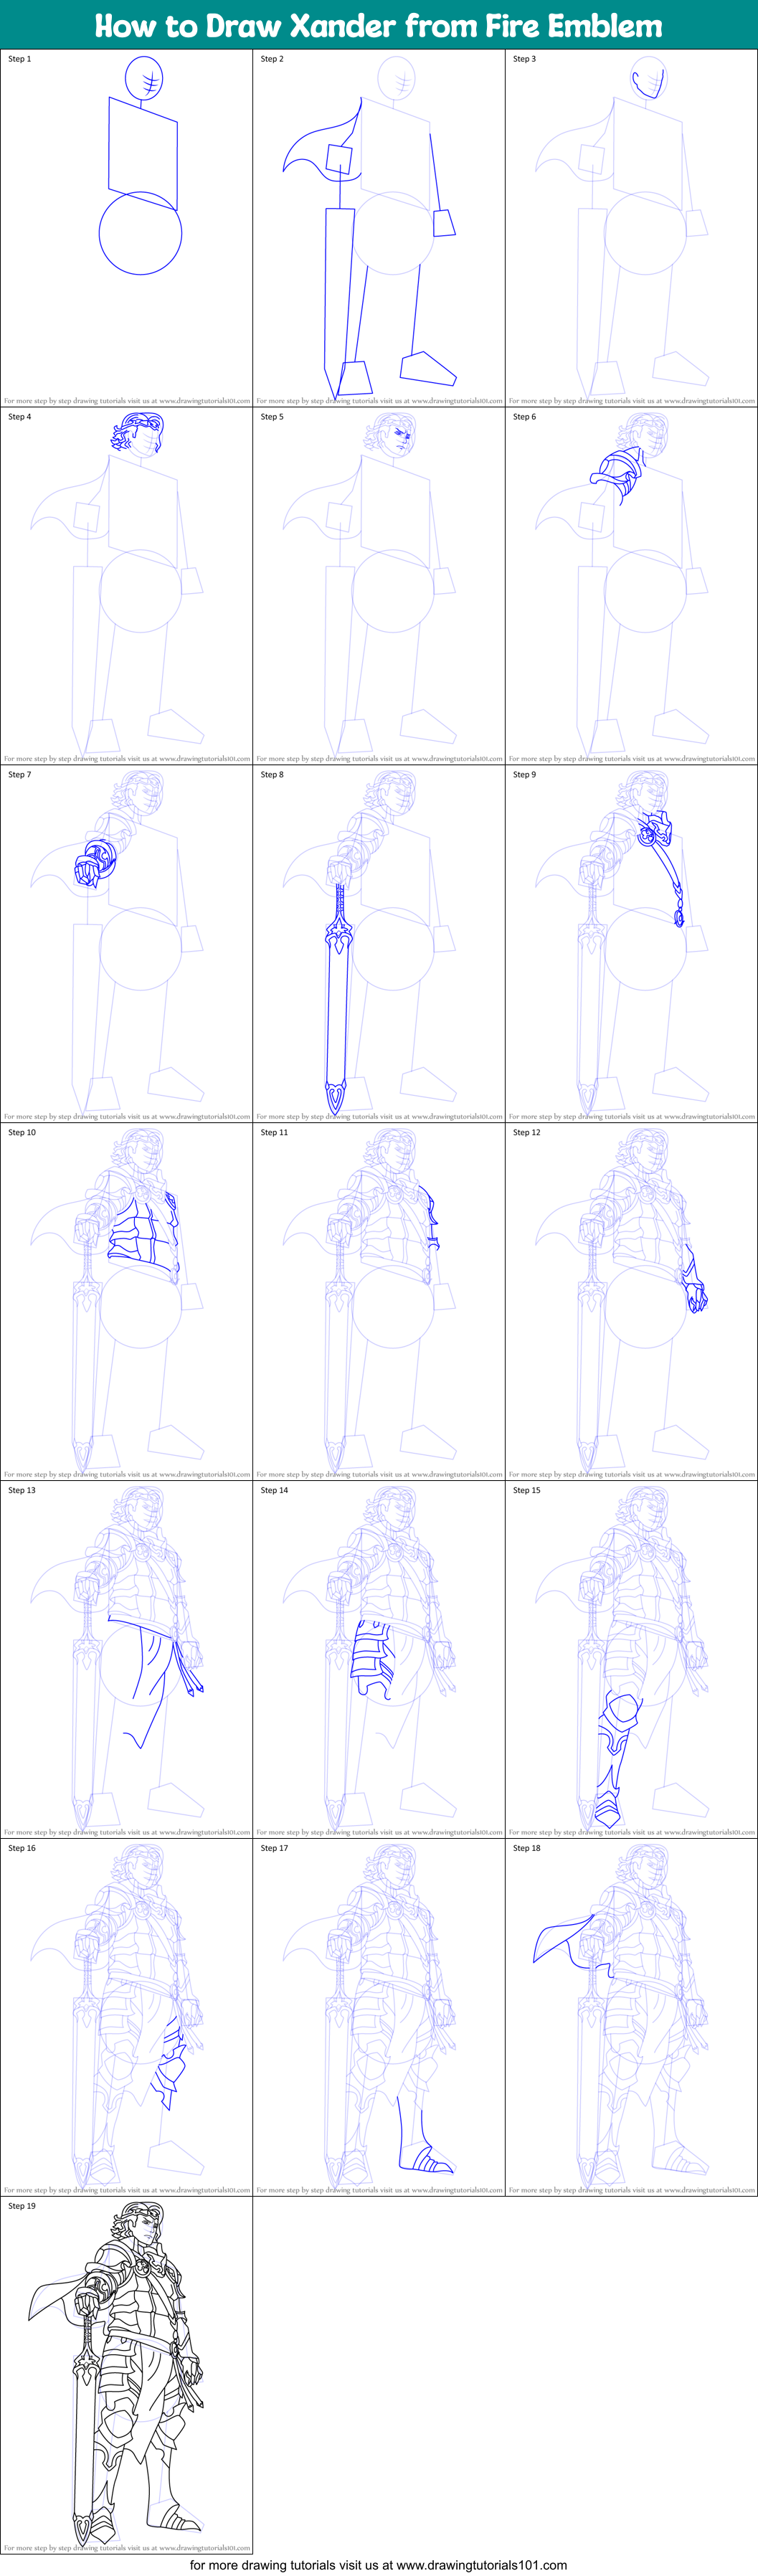 How to Draw Xander from Fire Emblem printable step by step drawing ...